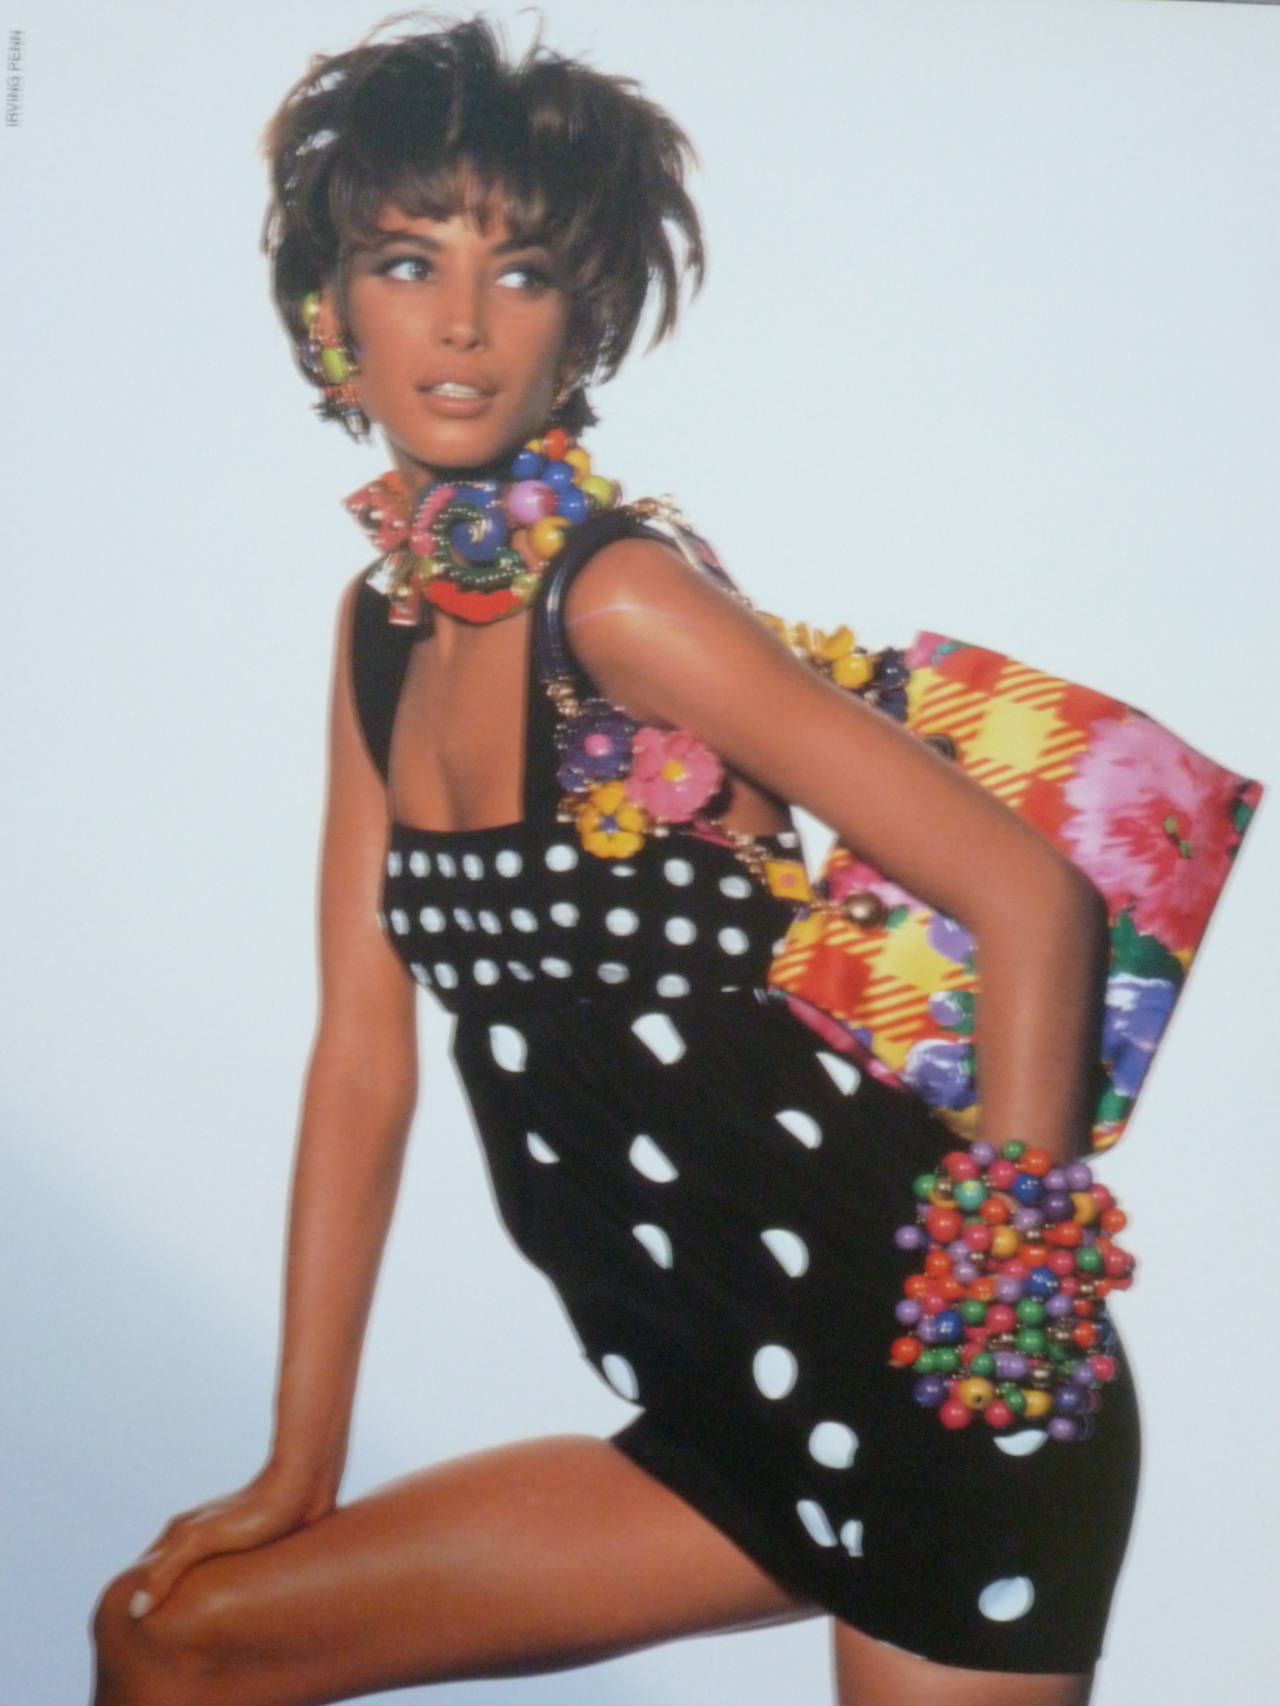 Gianni Versace Couture Polka Dot Babydoll Dress Spring 1991 In Excellent Condition For Sale In W1, GB